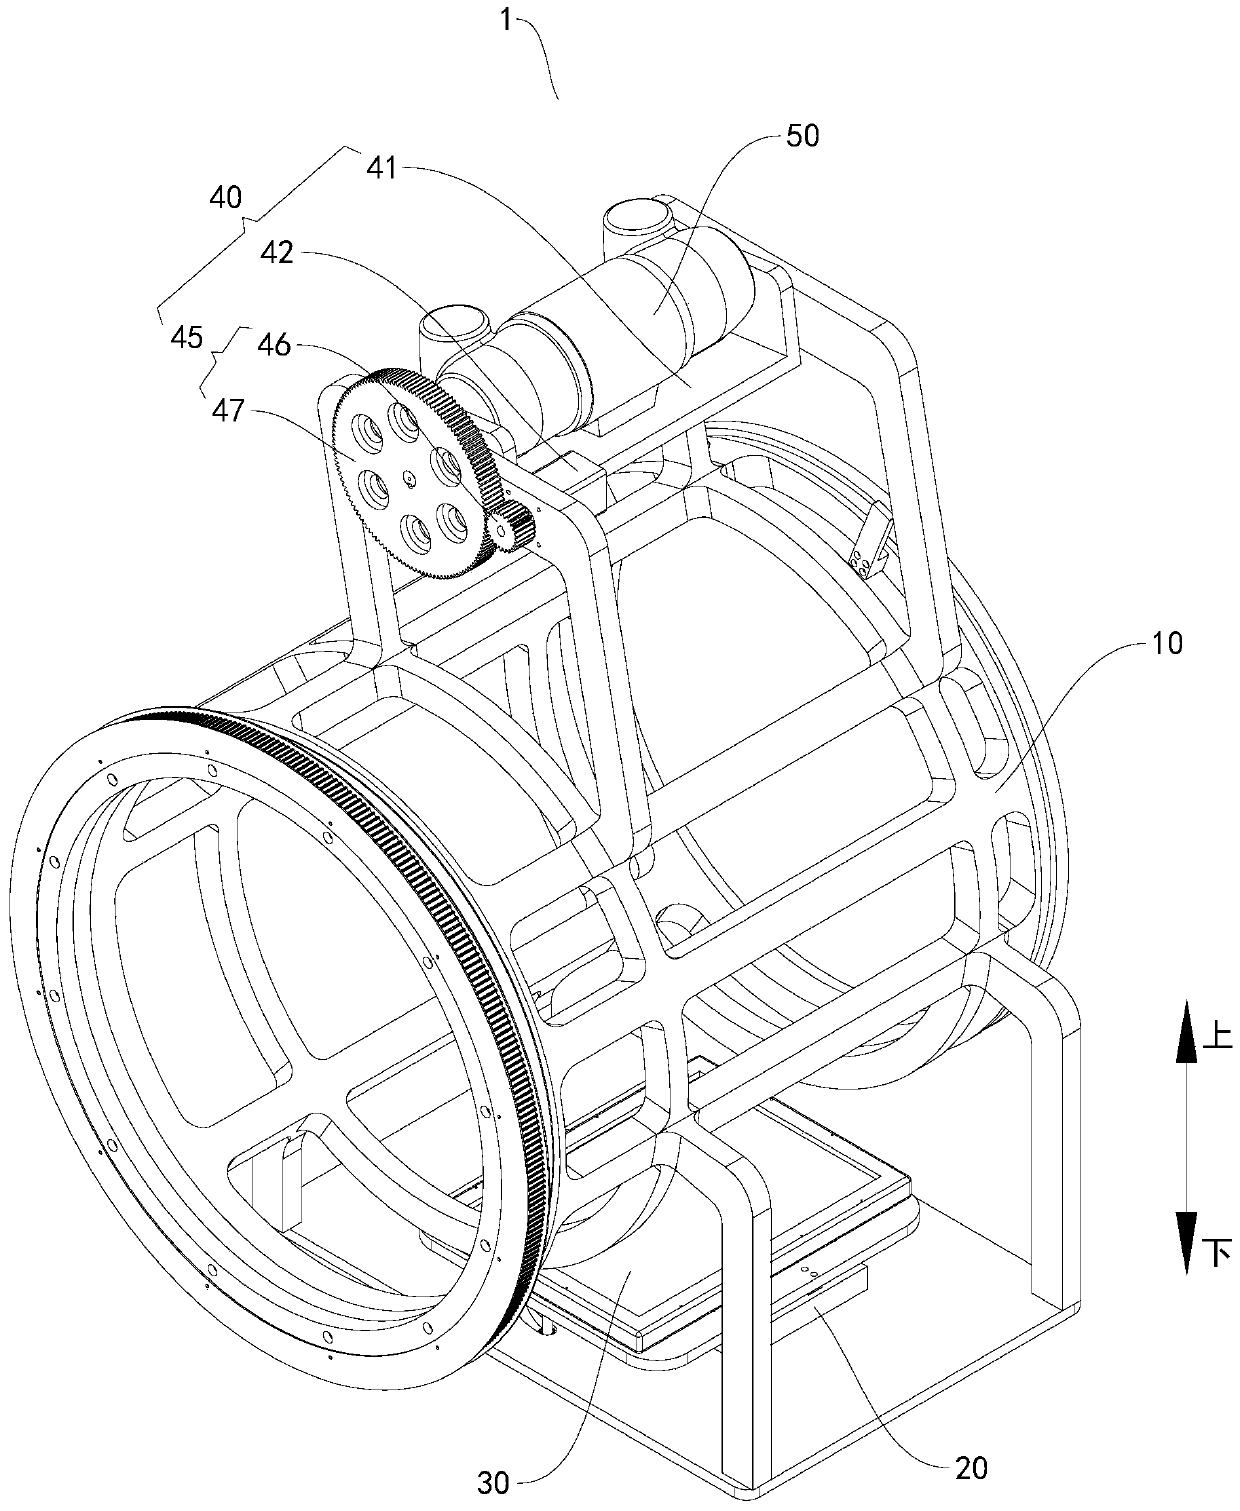 X-ray imaging device and its detector deflection mechanism